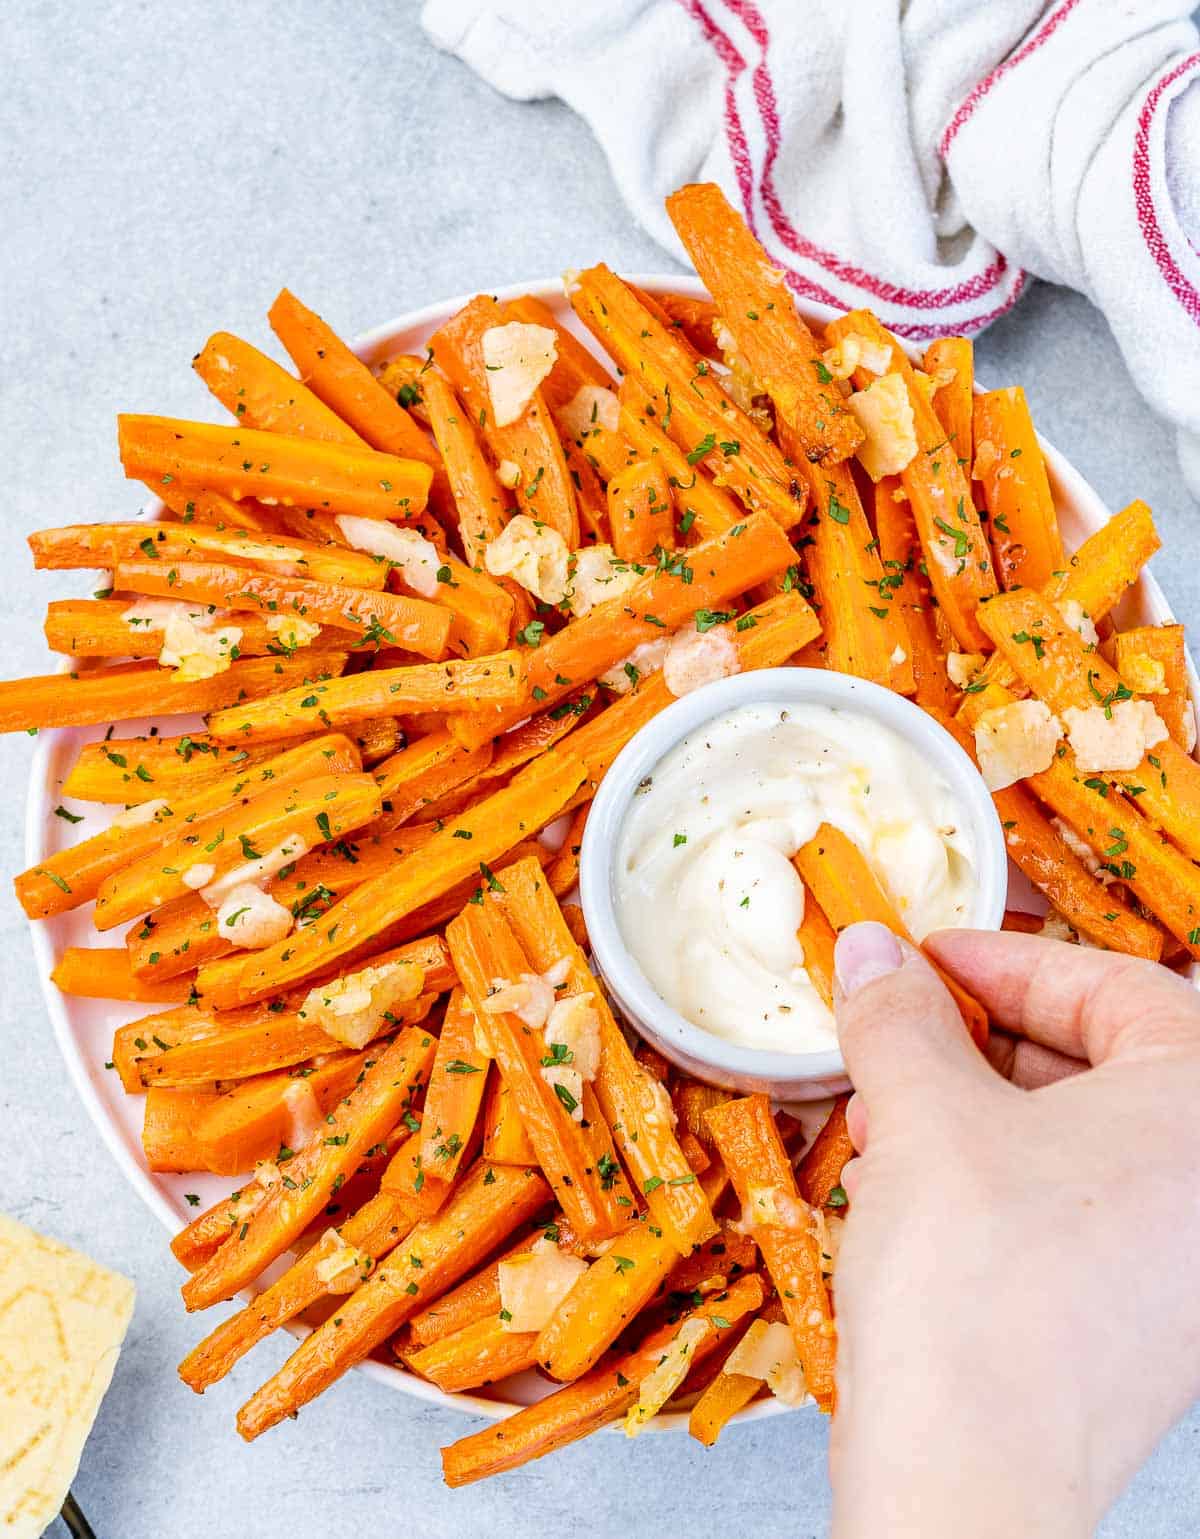 Hand dipping carrot fries into bowl of sauce.